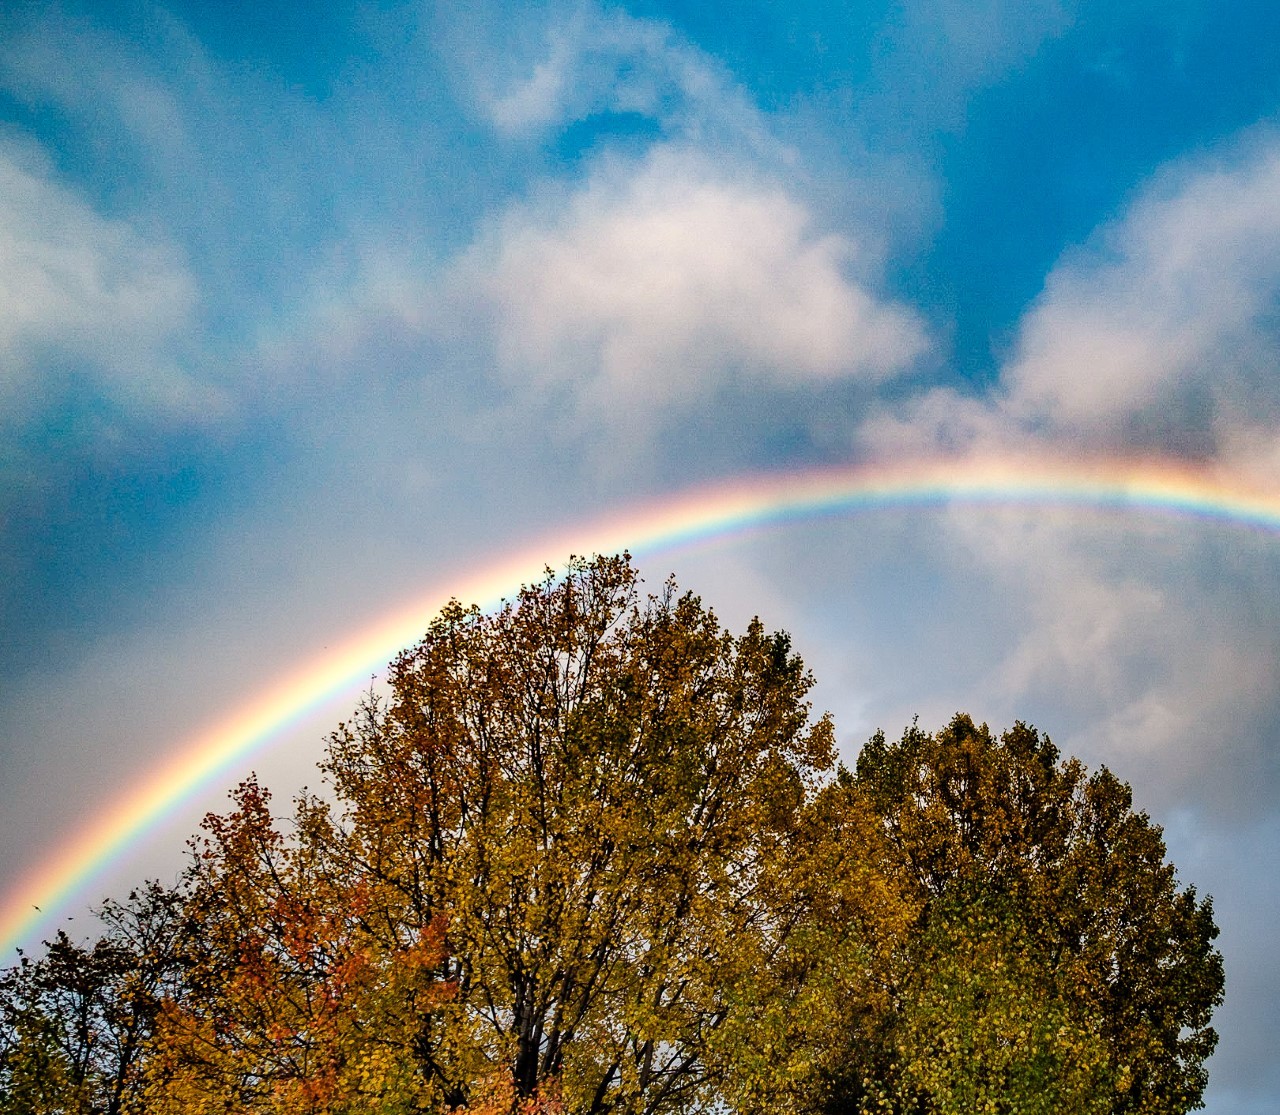 Picture of the week: Rainbow over the trees in the park